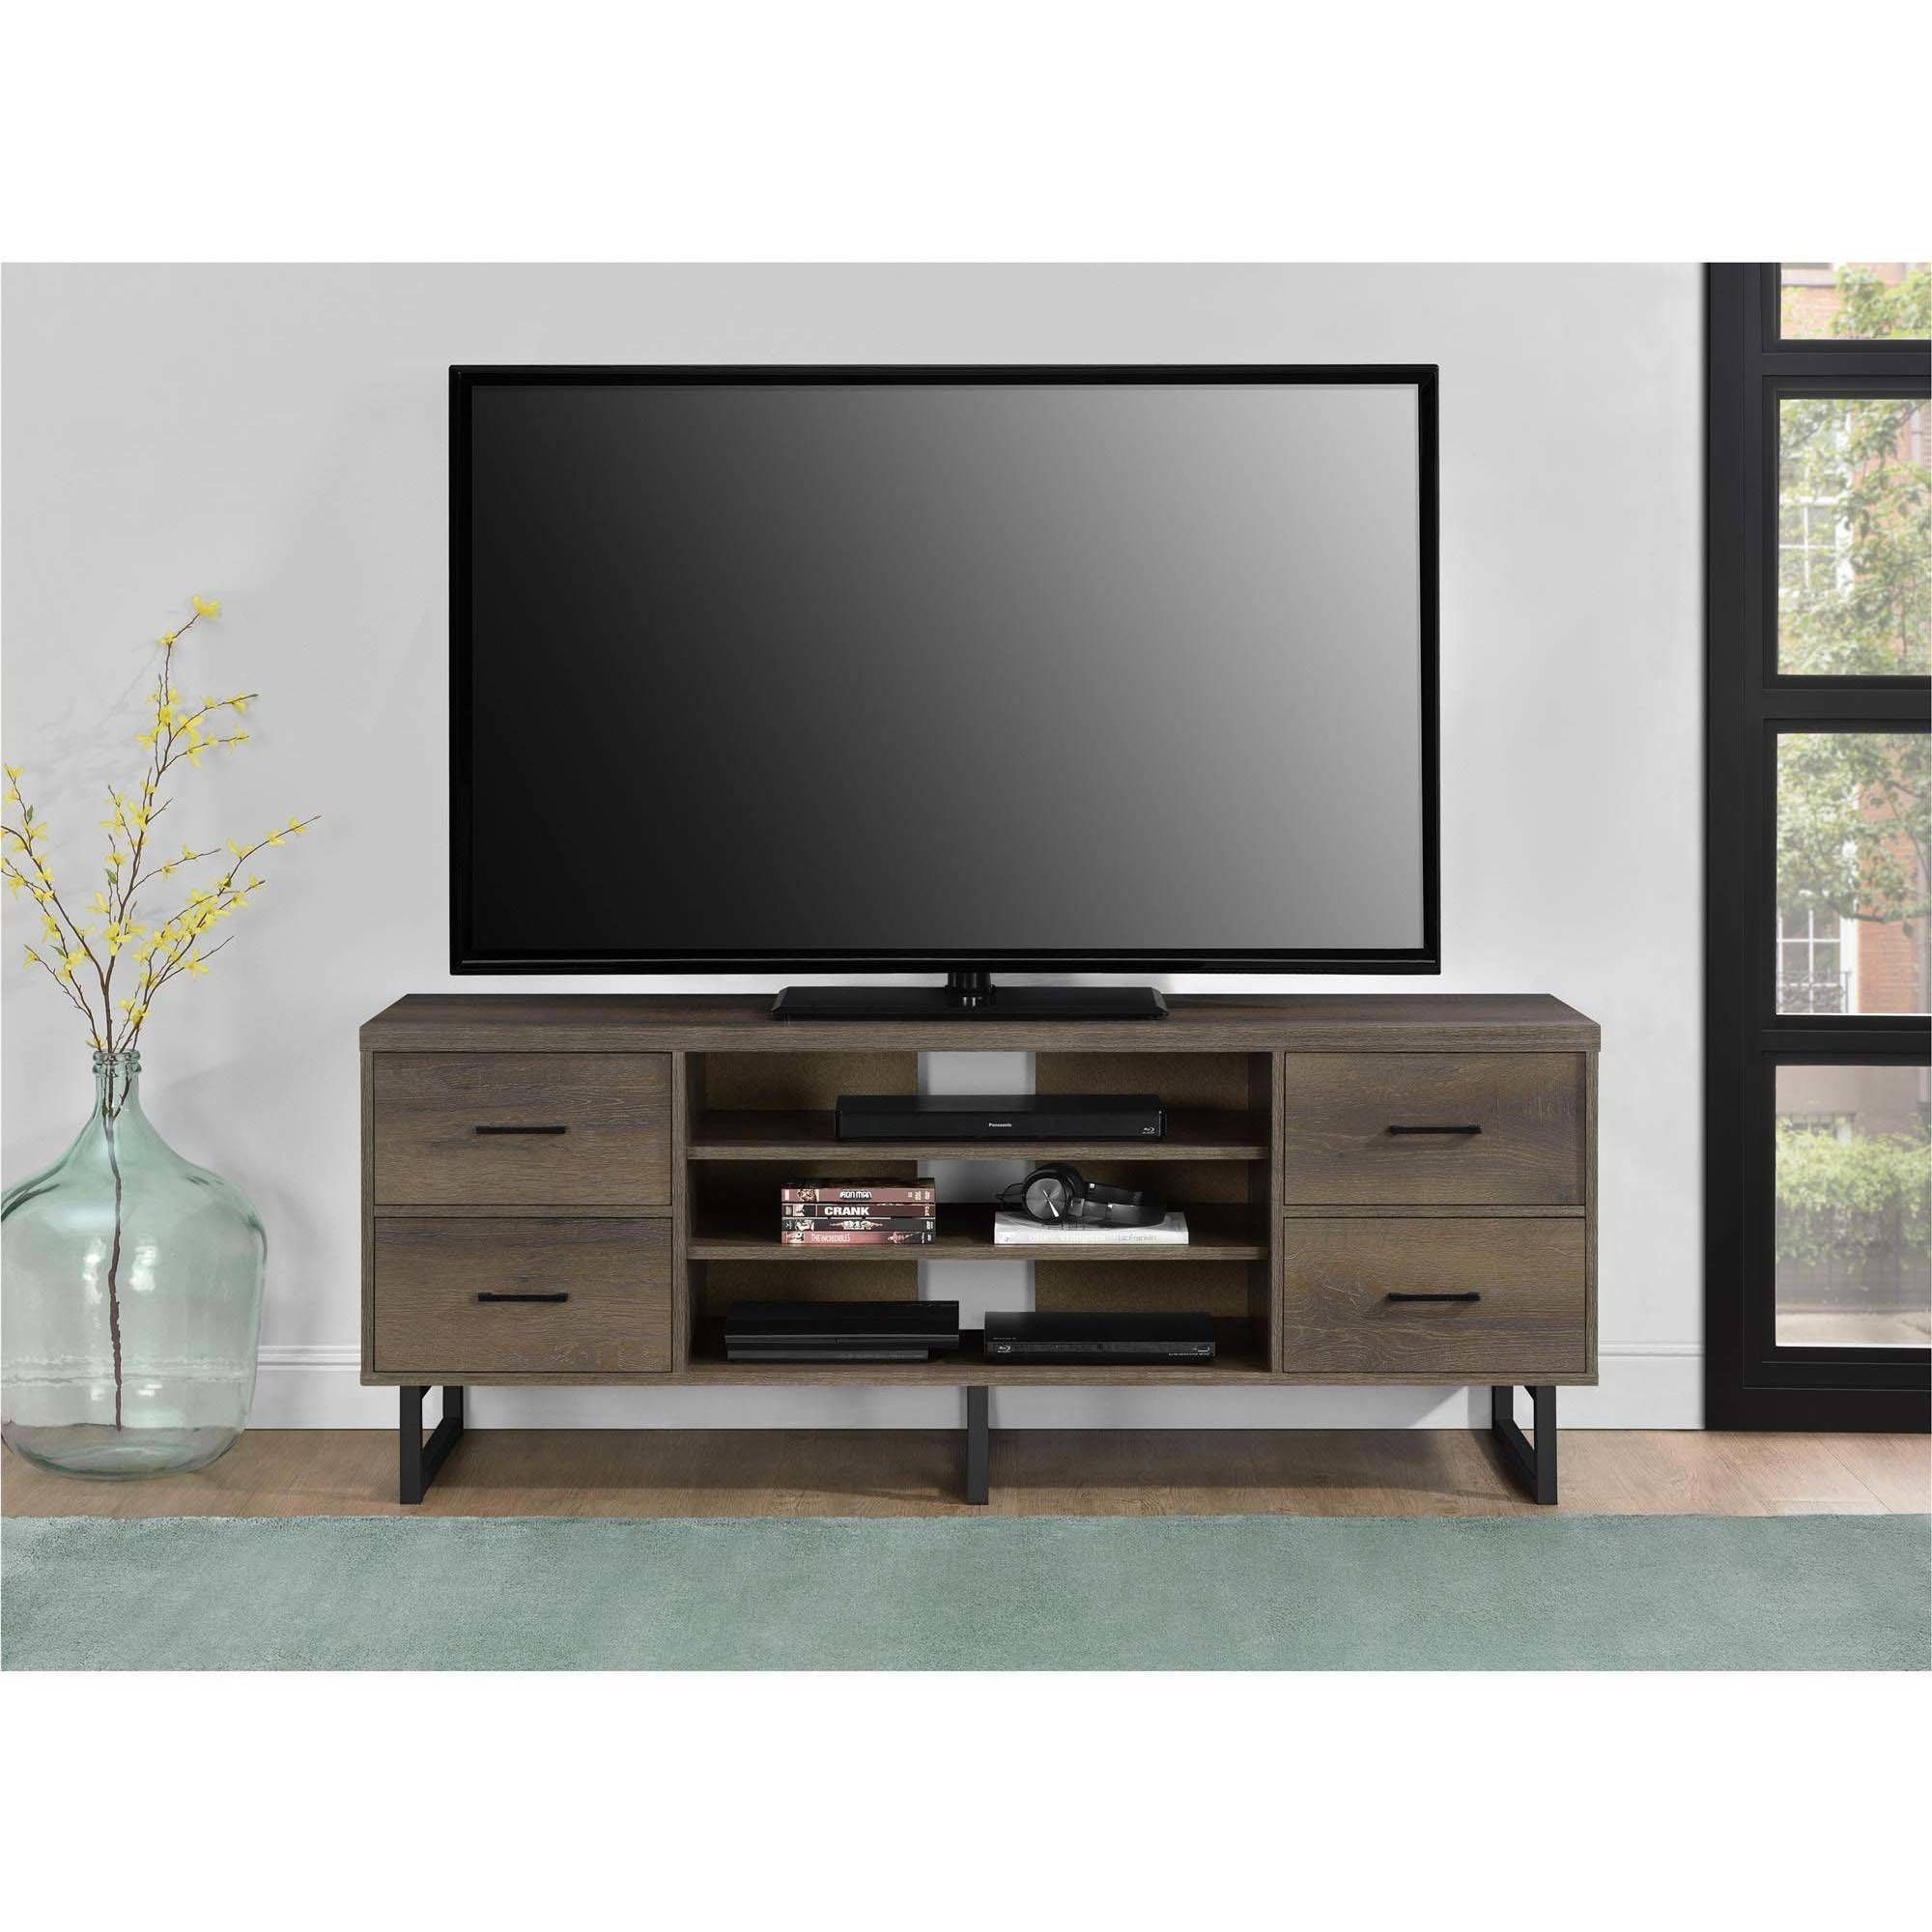 Ameriwood Home Candon Tv Stand With Bins For Tvs Up To 60 Within Bromley Extra Wide Oak Tv Stands (View 15 of 15)